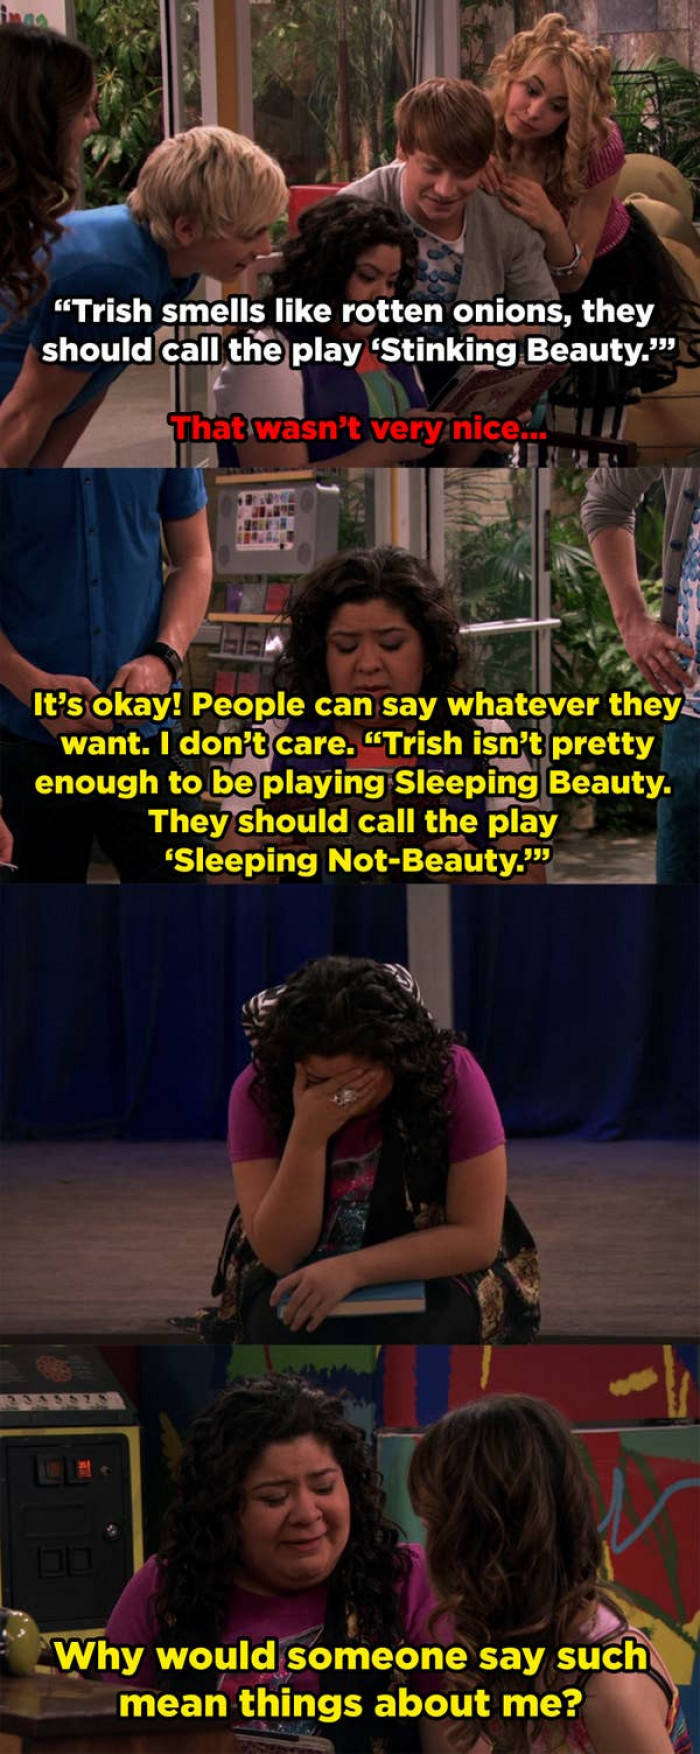 8. Austin & Ally: Due to her appearance, Trish became the target of cyberbullies.